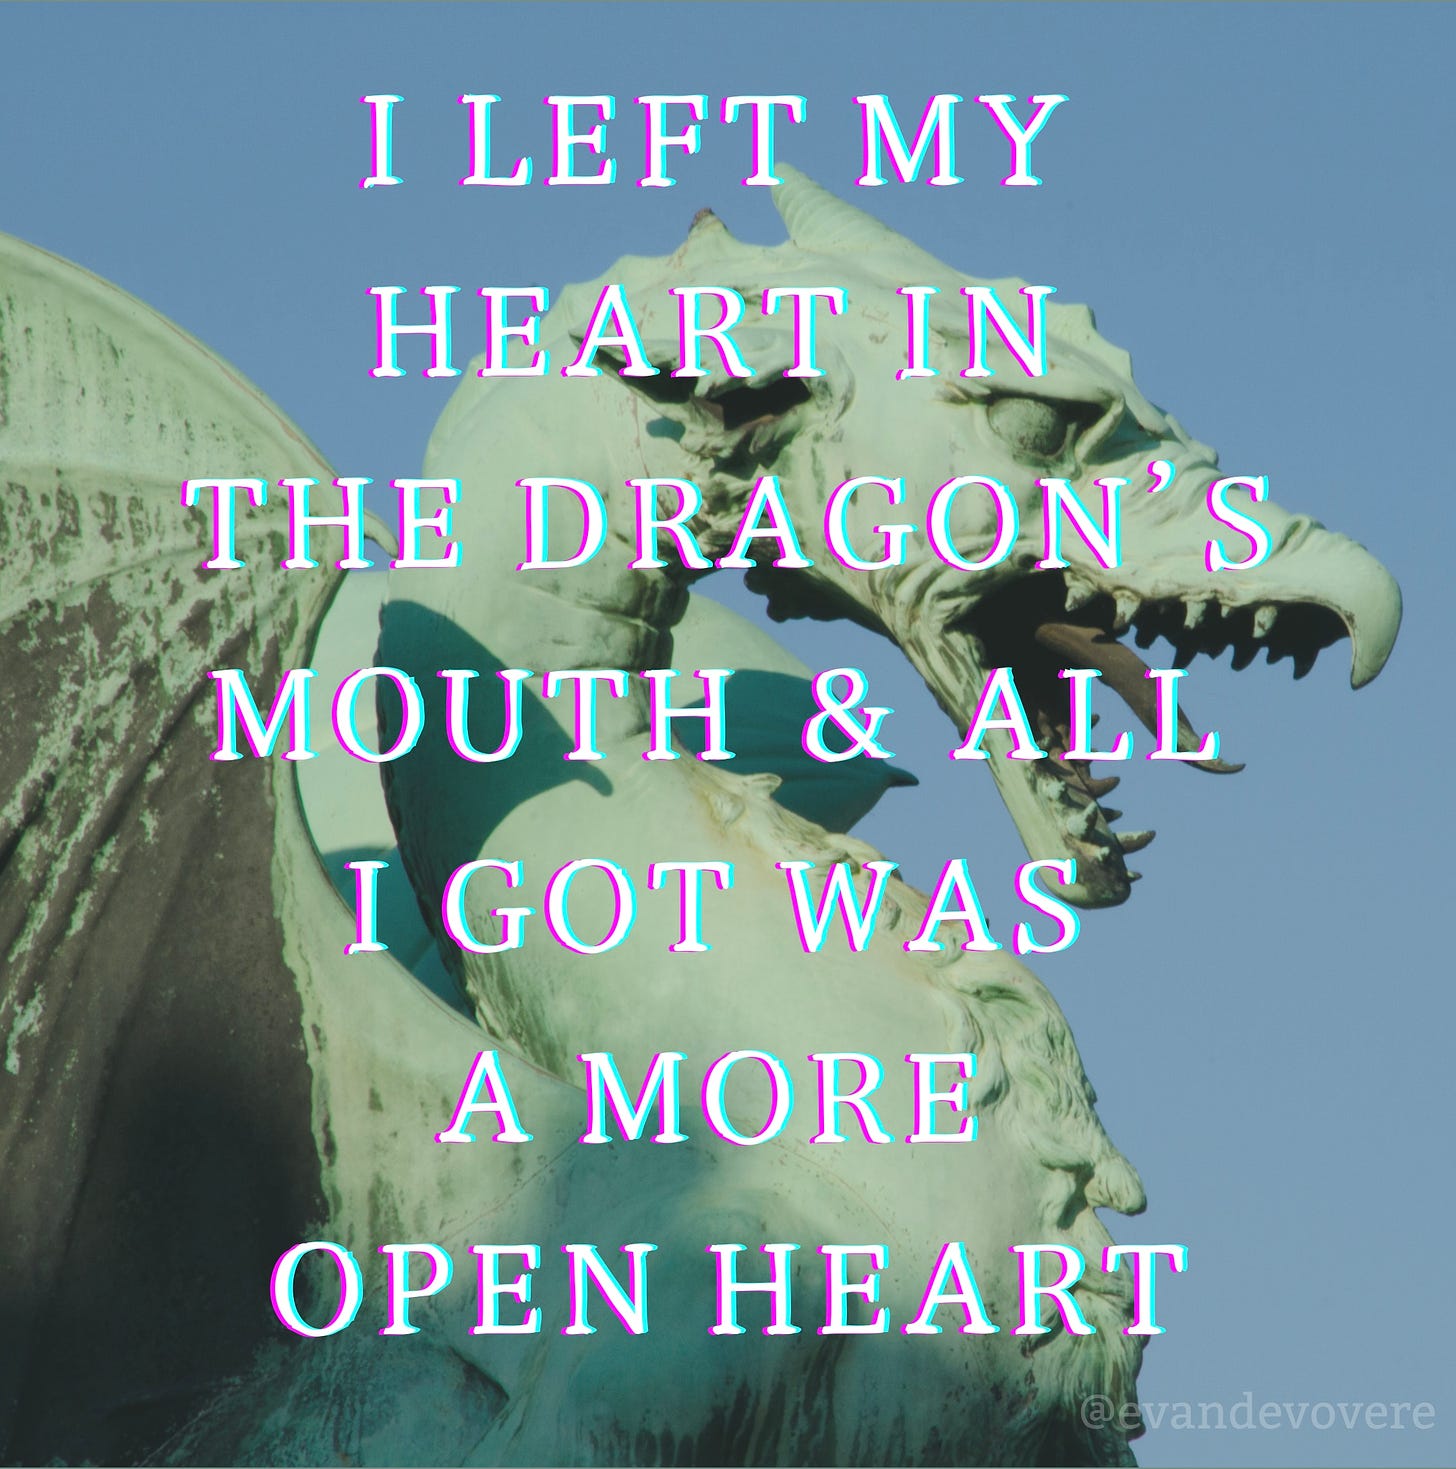 Statue of a light green dragon with its mouth open in a roar. Text over the dragon reads: “I LEFT MY HEART IN THE DRAGON’S MOUTH AND ALL I GOT WAS A MORE OPEN HEART”